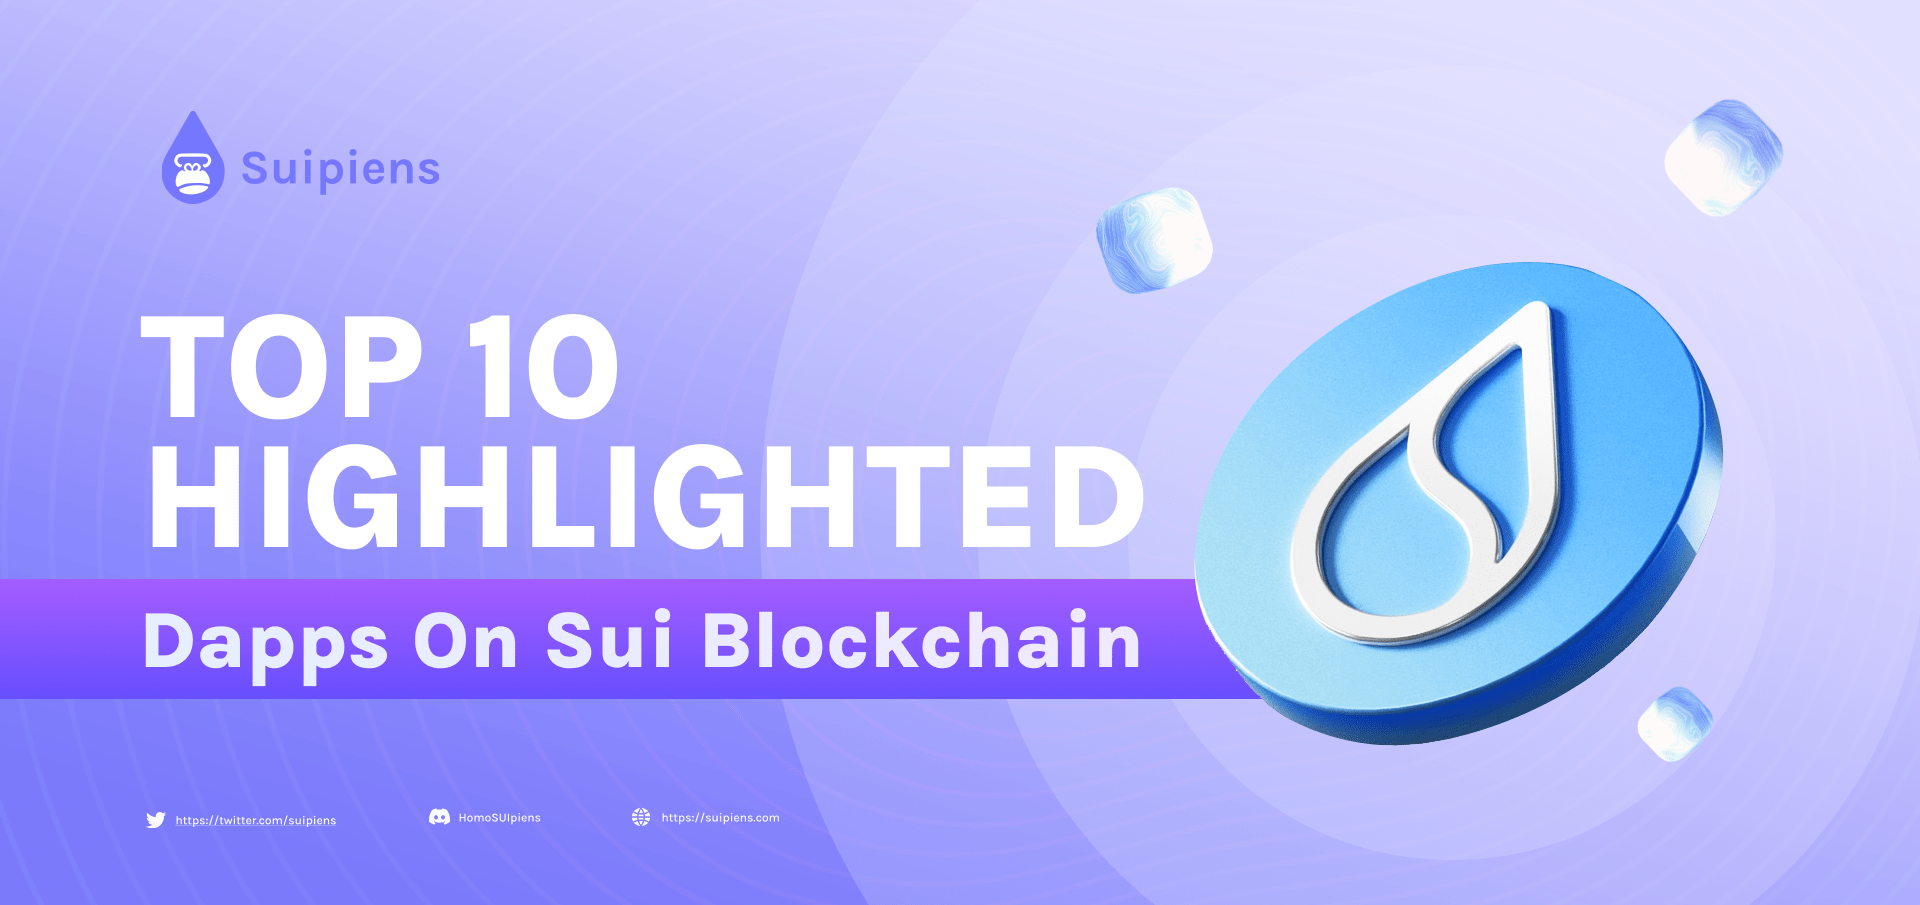 Top 10 Highlighted Dapps On Sui Blockchain